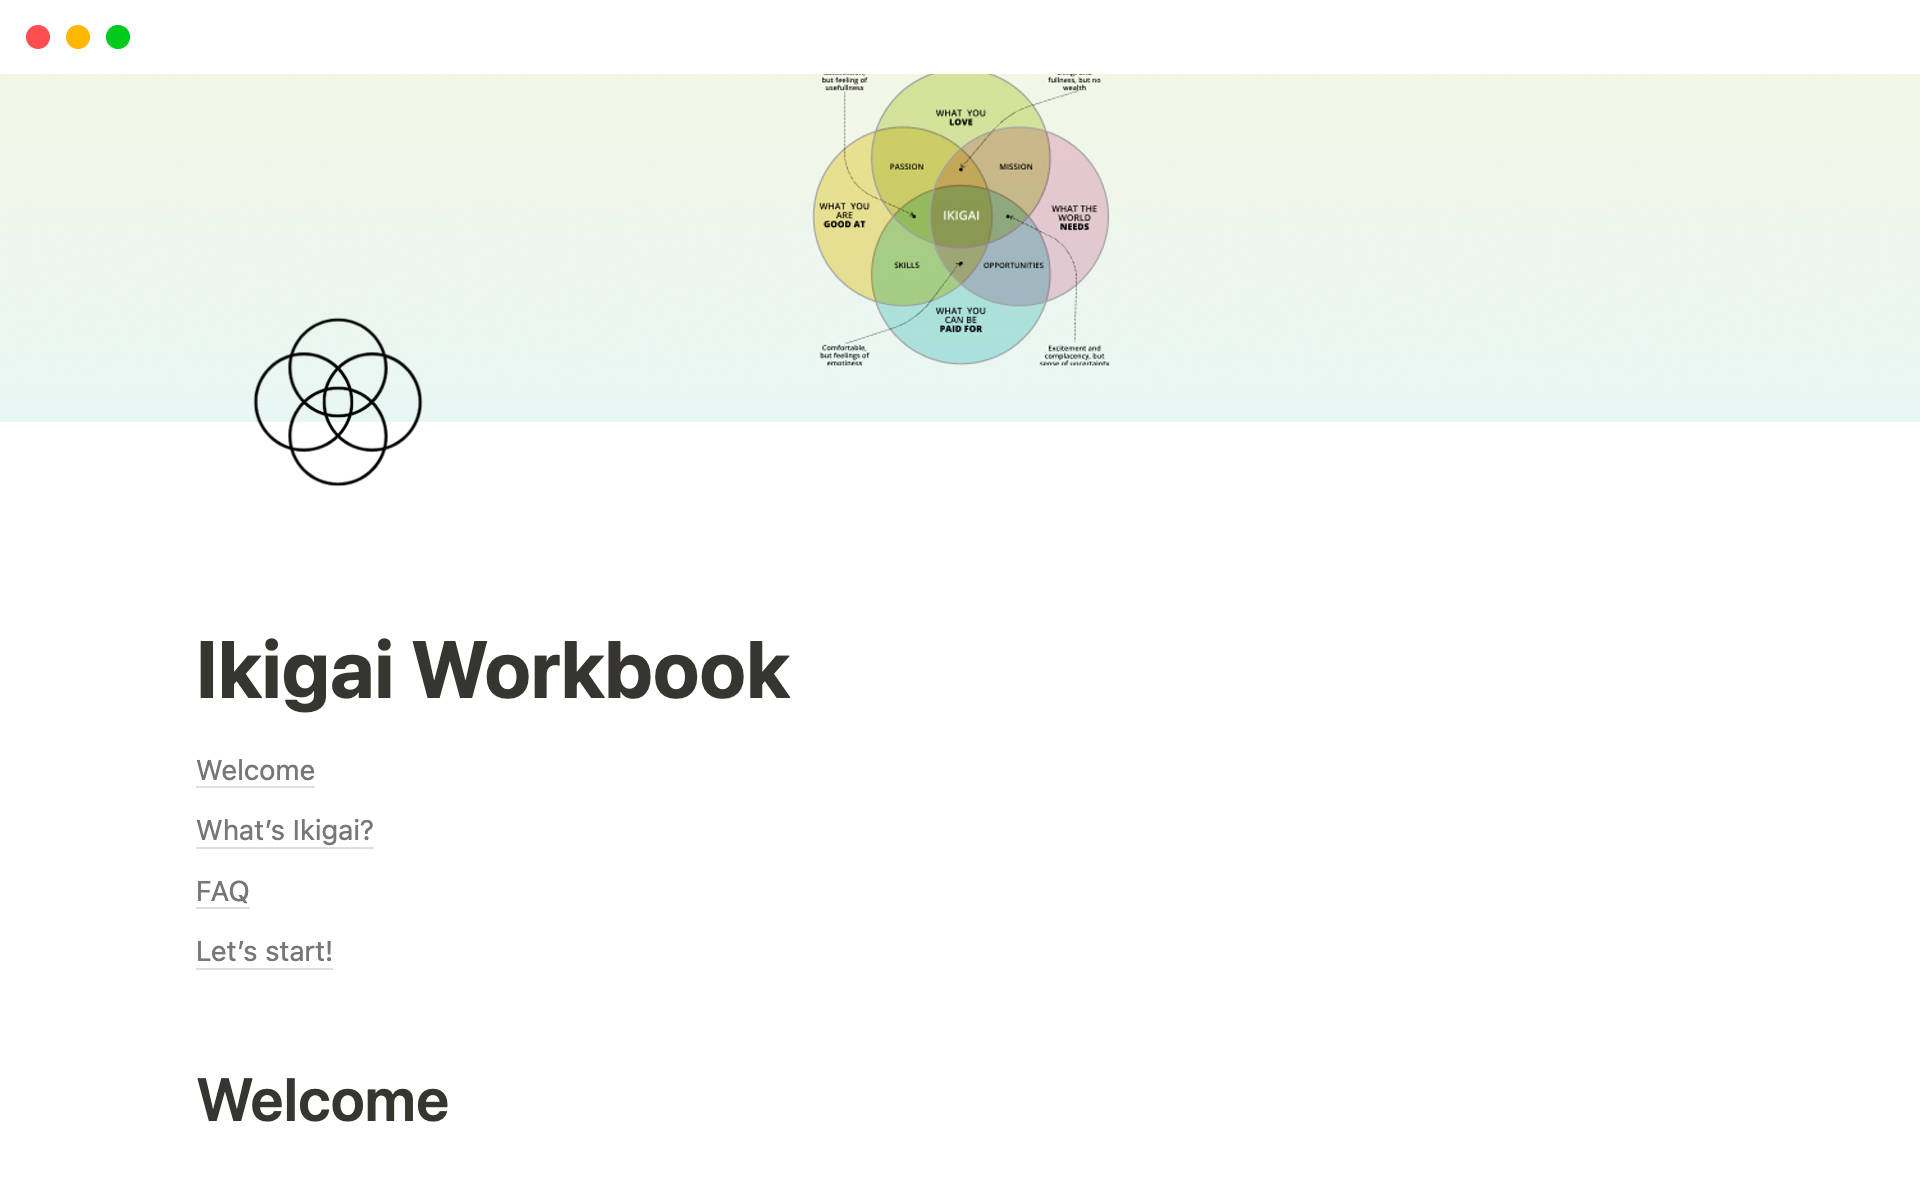 It’s a workbook for for introspection and search for motivation for yourself and your inner ikigai